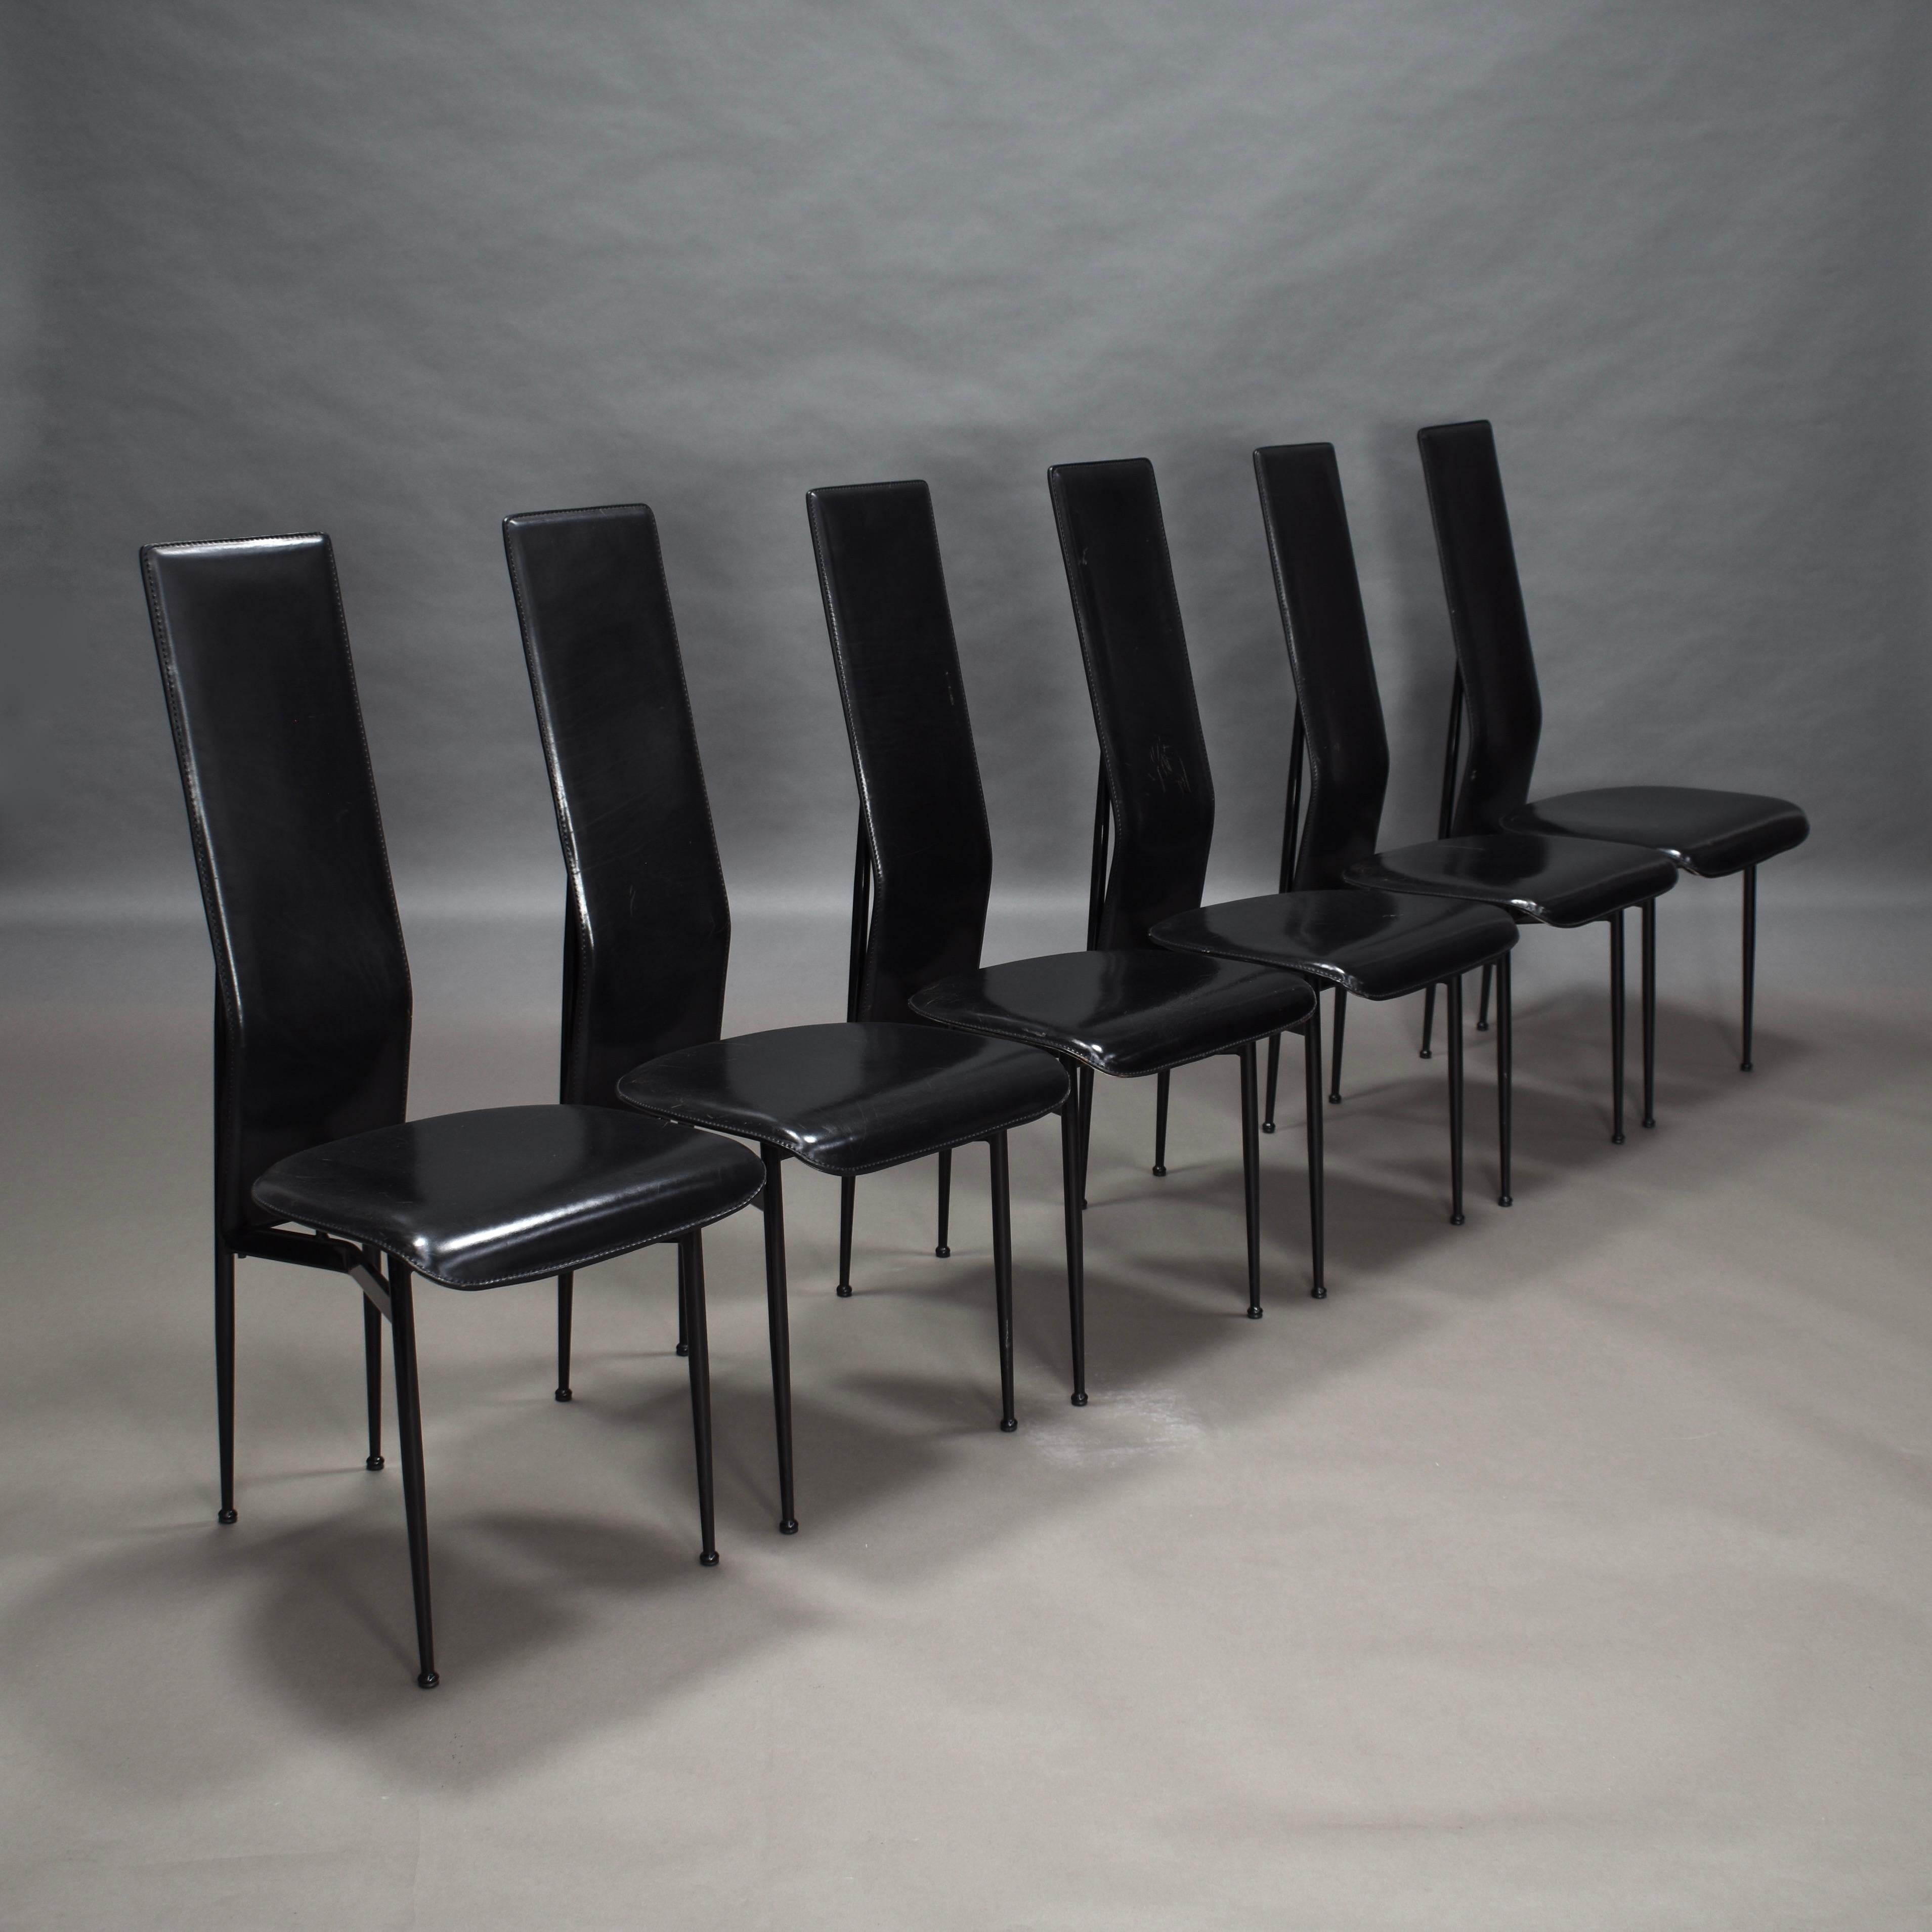 Set of six dining chairs in black leather by Giancarlo Vegni and Gianfranco Gualtierotti for Fasem, Italy, circa 1980.

Designer: Giancarlo Vegni and Gianfranco Gualtierotti

Manufacturer: Fasem

Country: Italy

Model: dining chair

Design